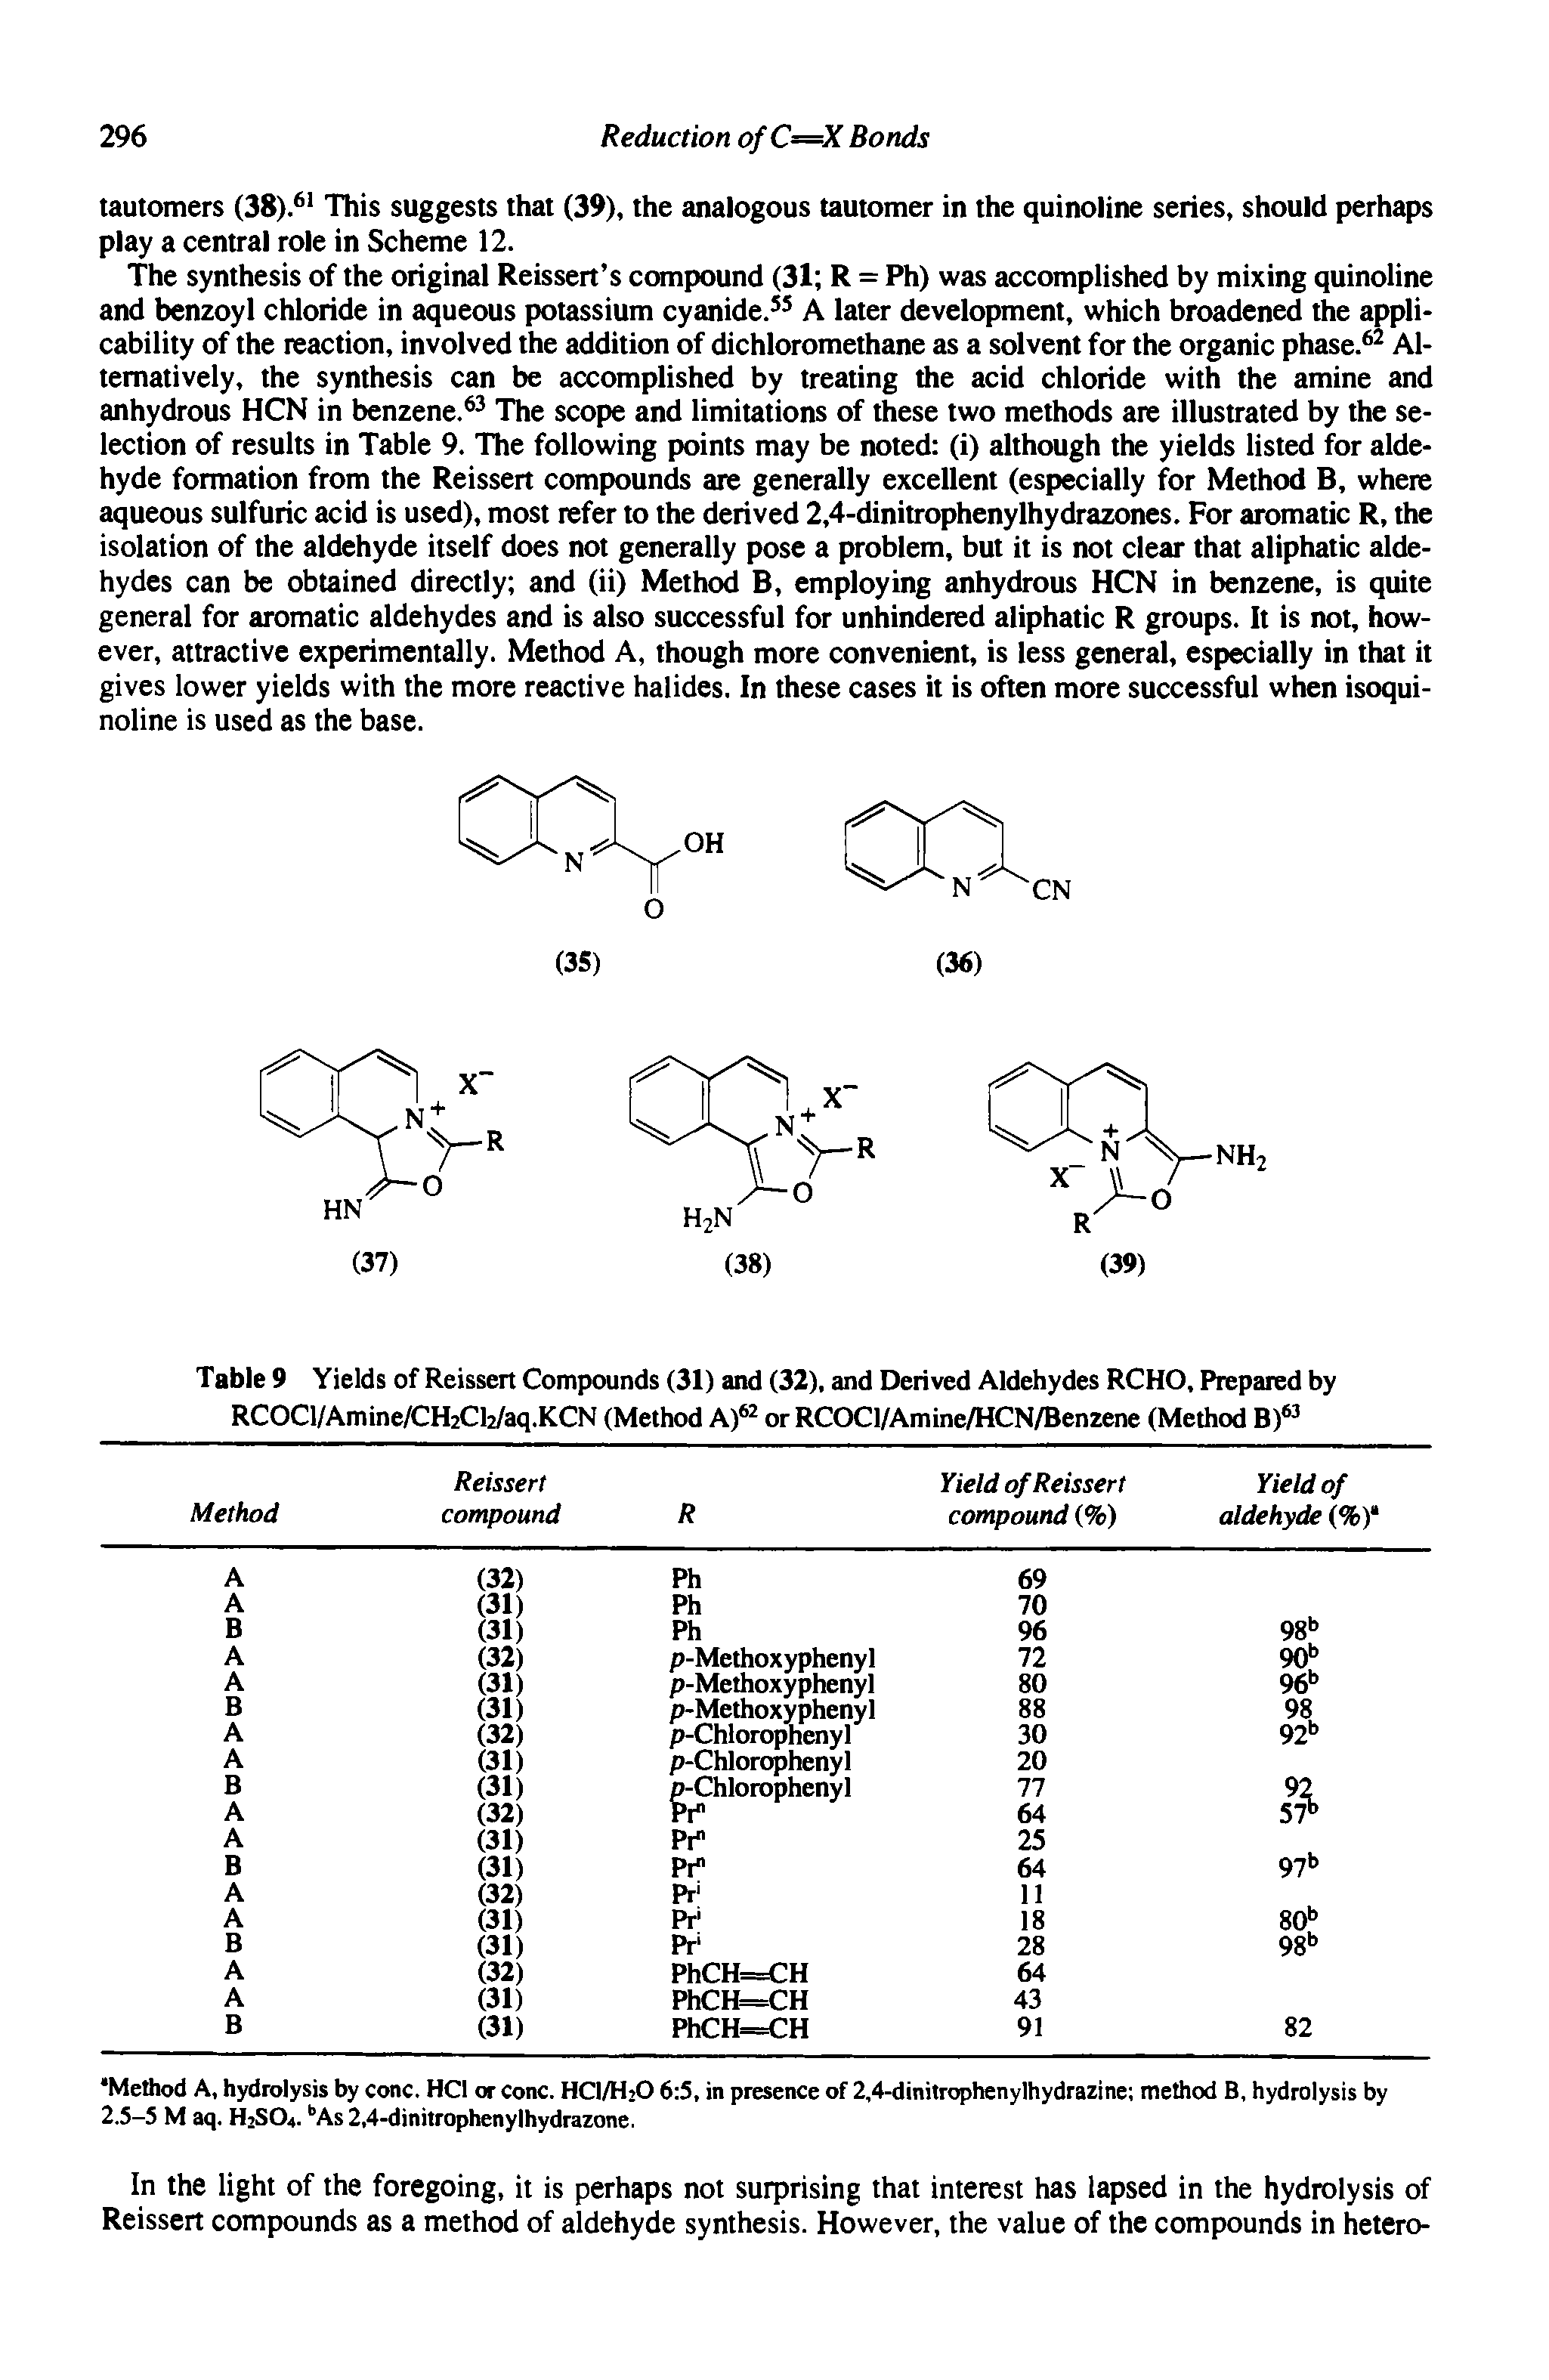 Table 9 Yields of Reissert Compounds (31) and (32), and Derived Aldehydes RCHO, Prepared by RCOCl/Amine/CH2Cl2/aq.KCN (Method A) or RCOCl/Amine/HCN/Benzene (Method B) ...